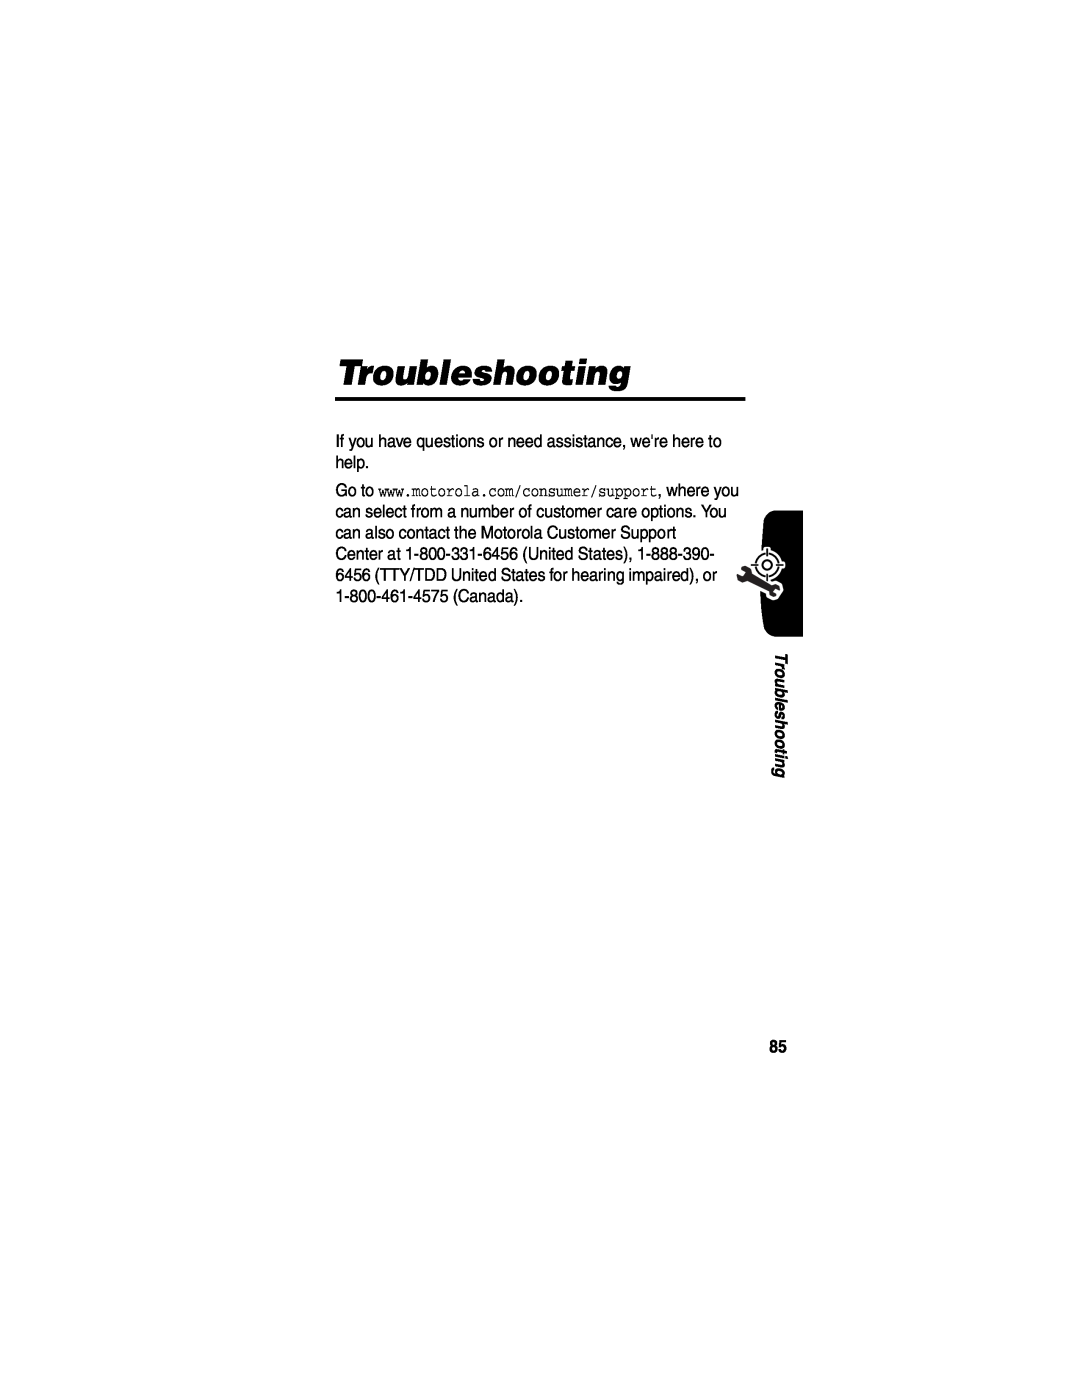 Motorola V555 manual Troubleshooting, If you have questions or need assistance, were here to help 